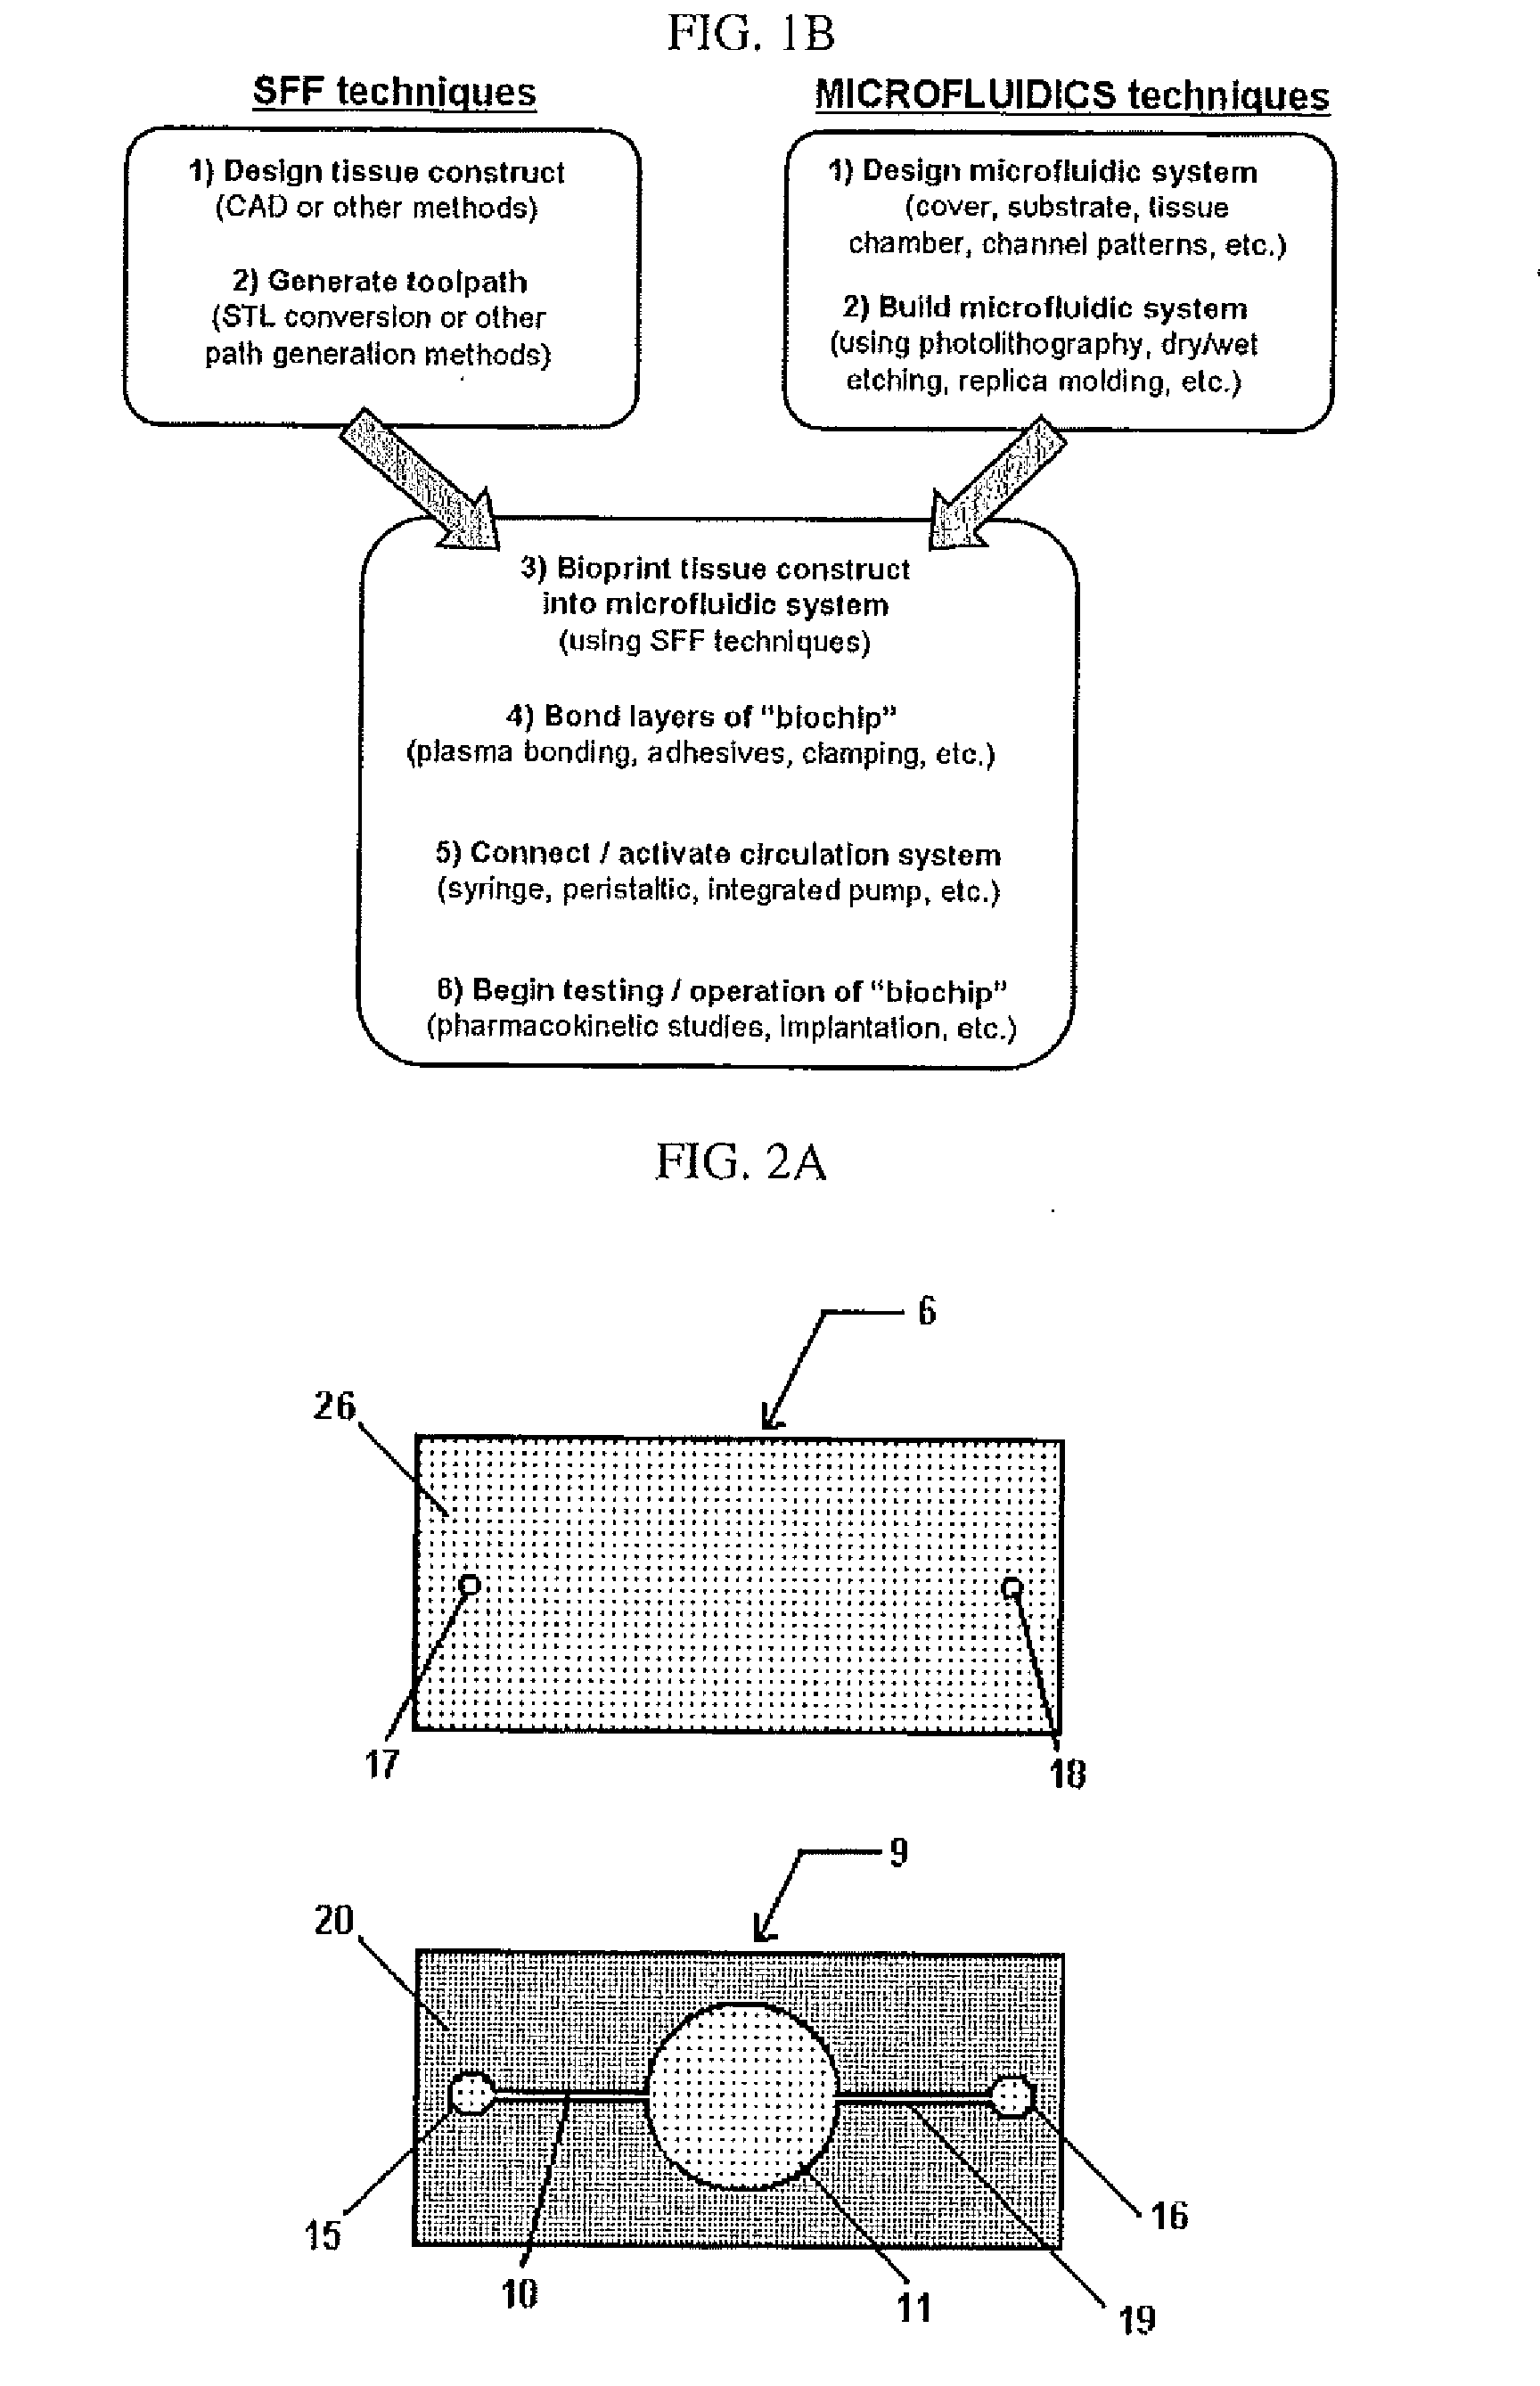 Compositions and Methods for Functionalized Patterning of Tissue Engineering Substrates Including Bioprinting Cell-Laden Constructs for Multicompartment Tissue Chambers